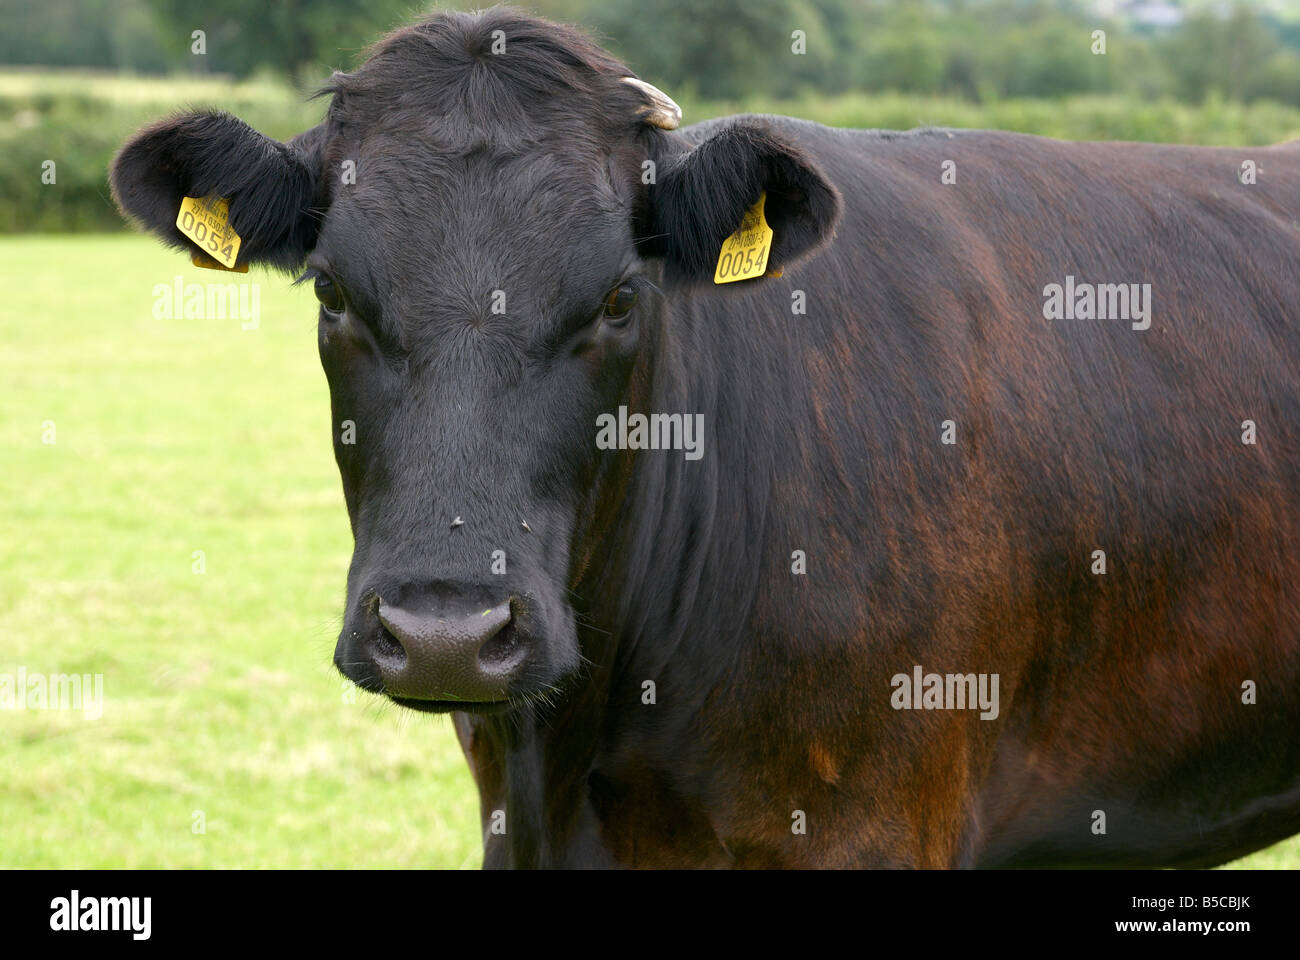 Black bullock showing yellow ear tags for identification, Coniston in the English Lake District Stock Photo